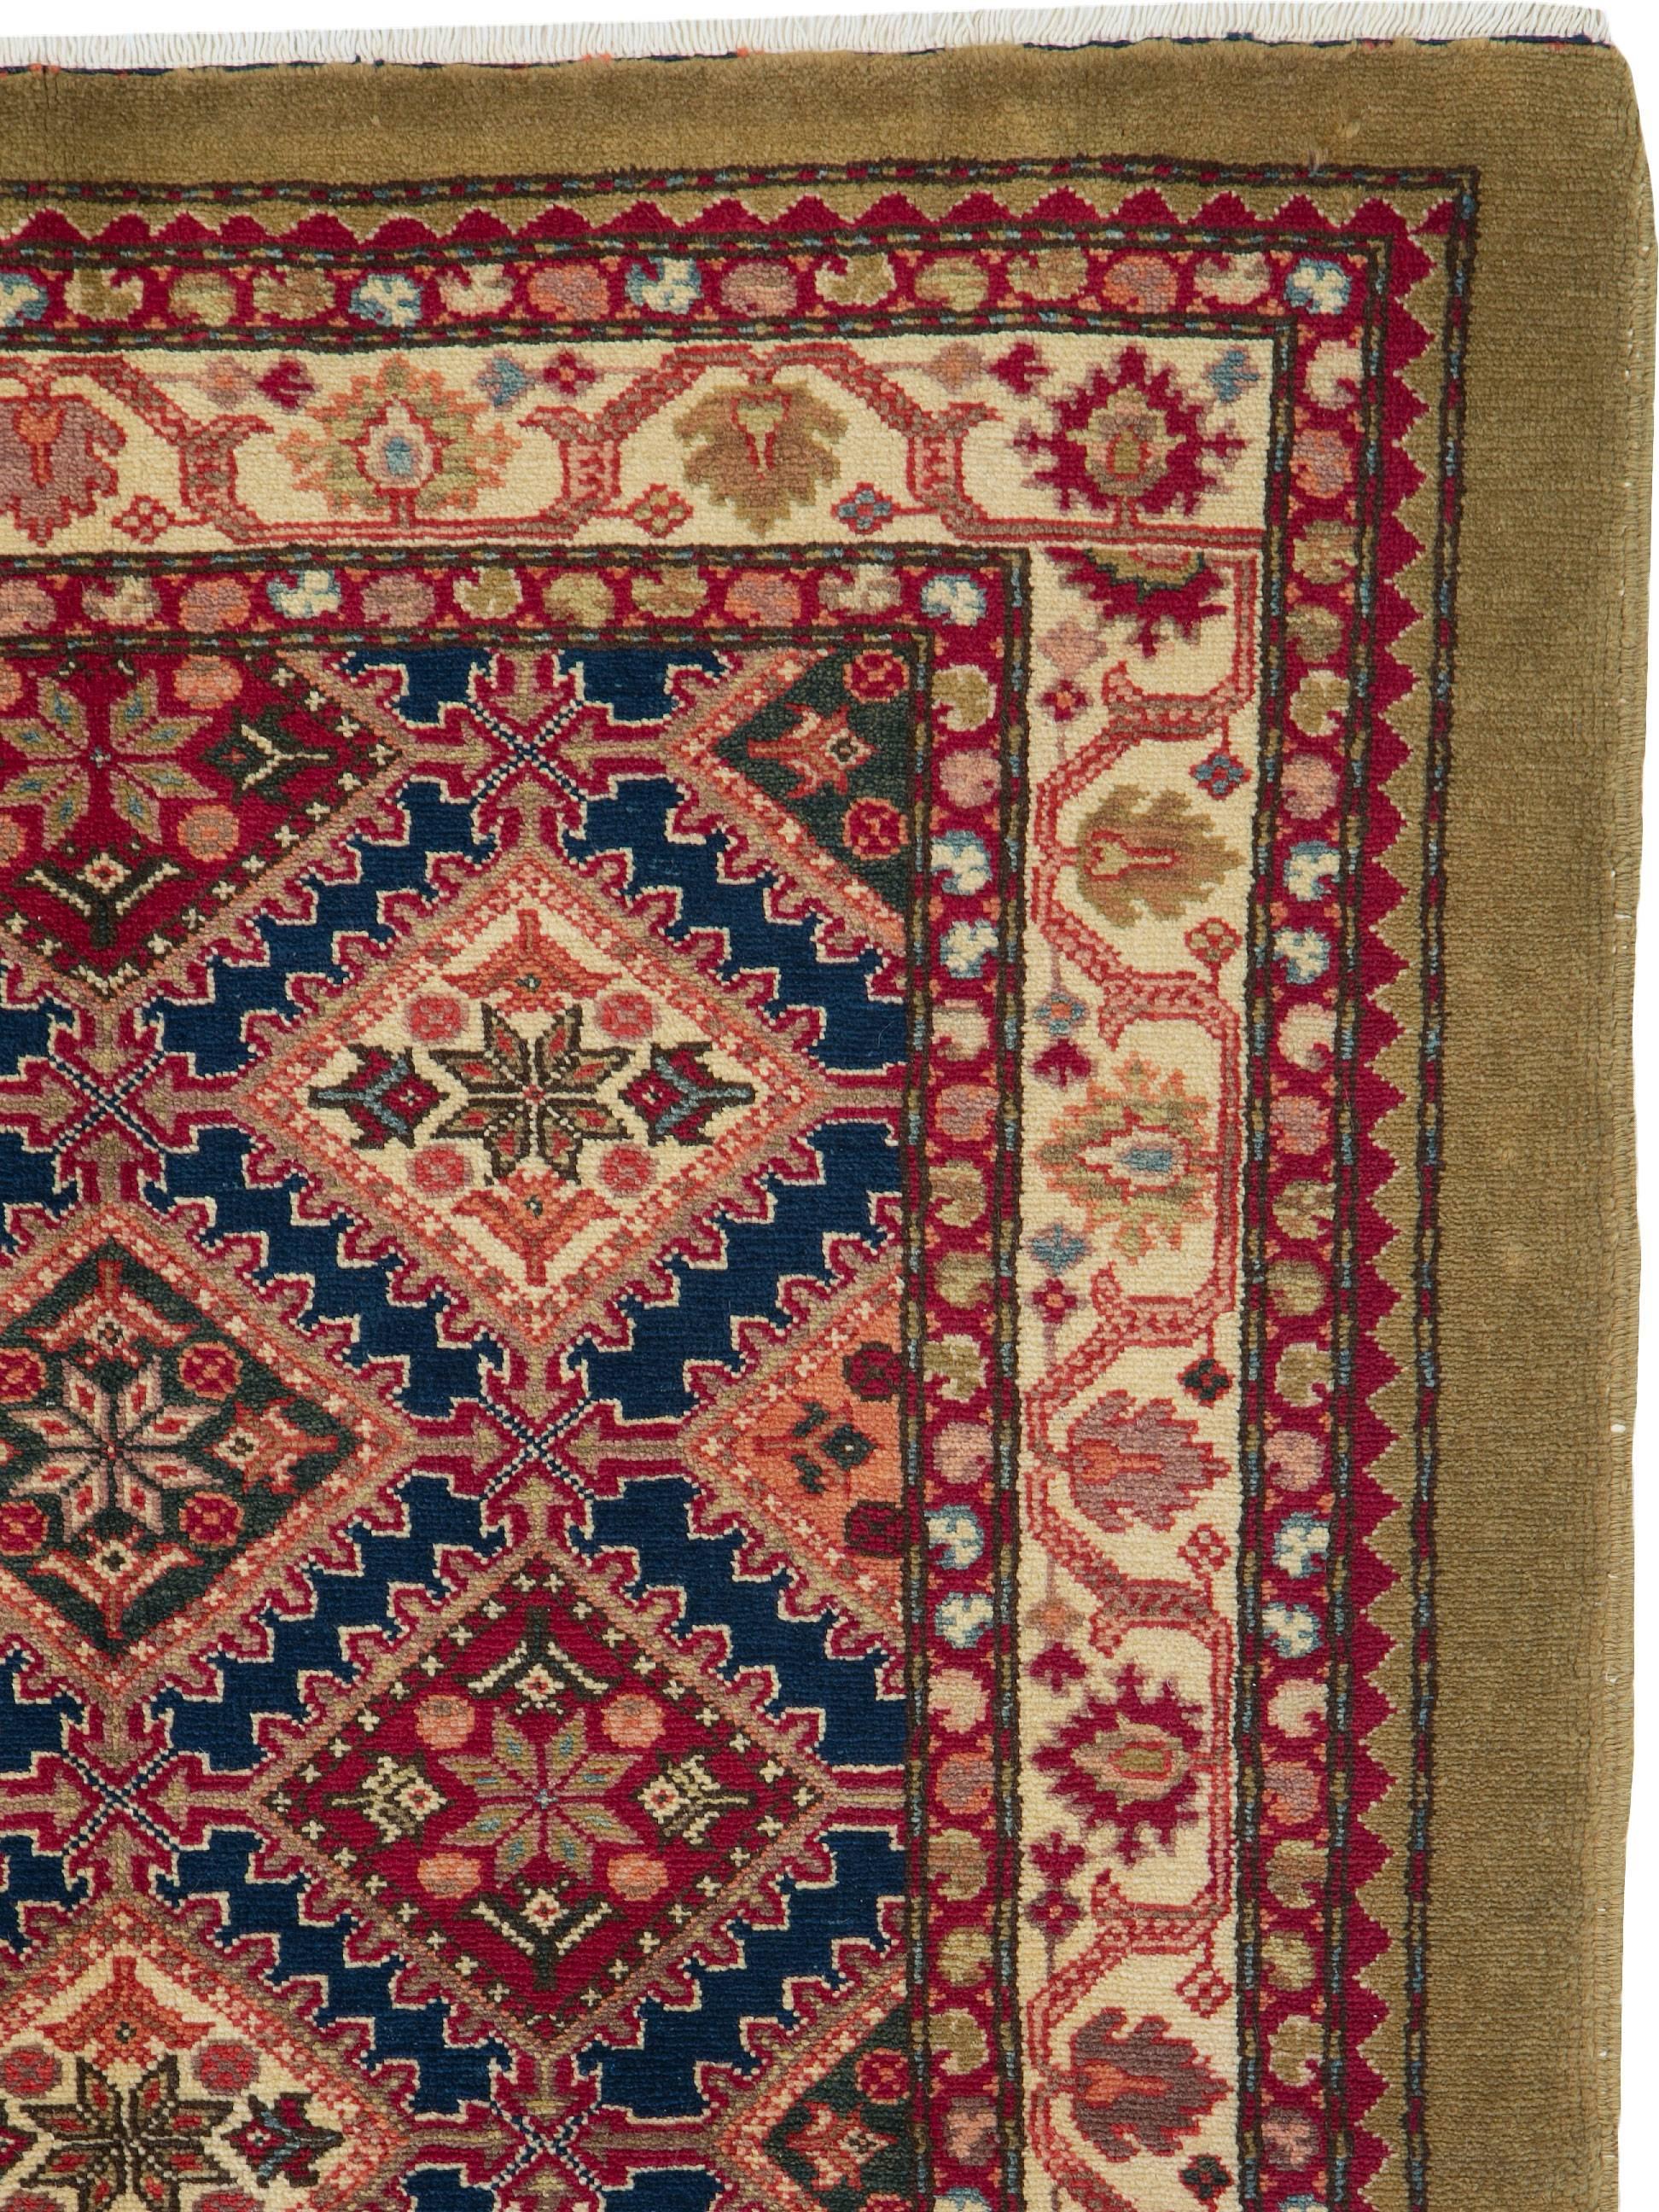 A modern Persian Malayer carpet from the 21st century.